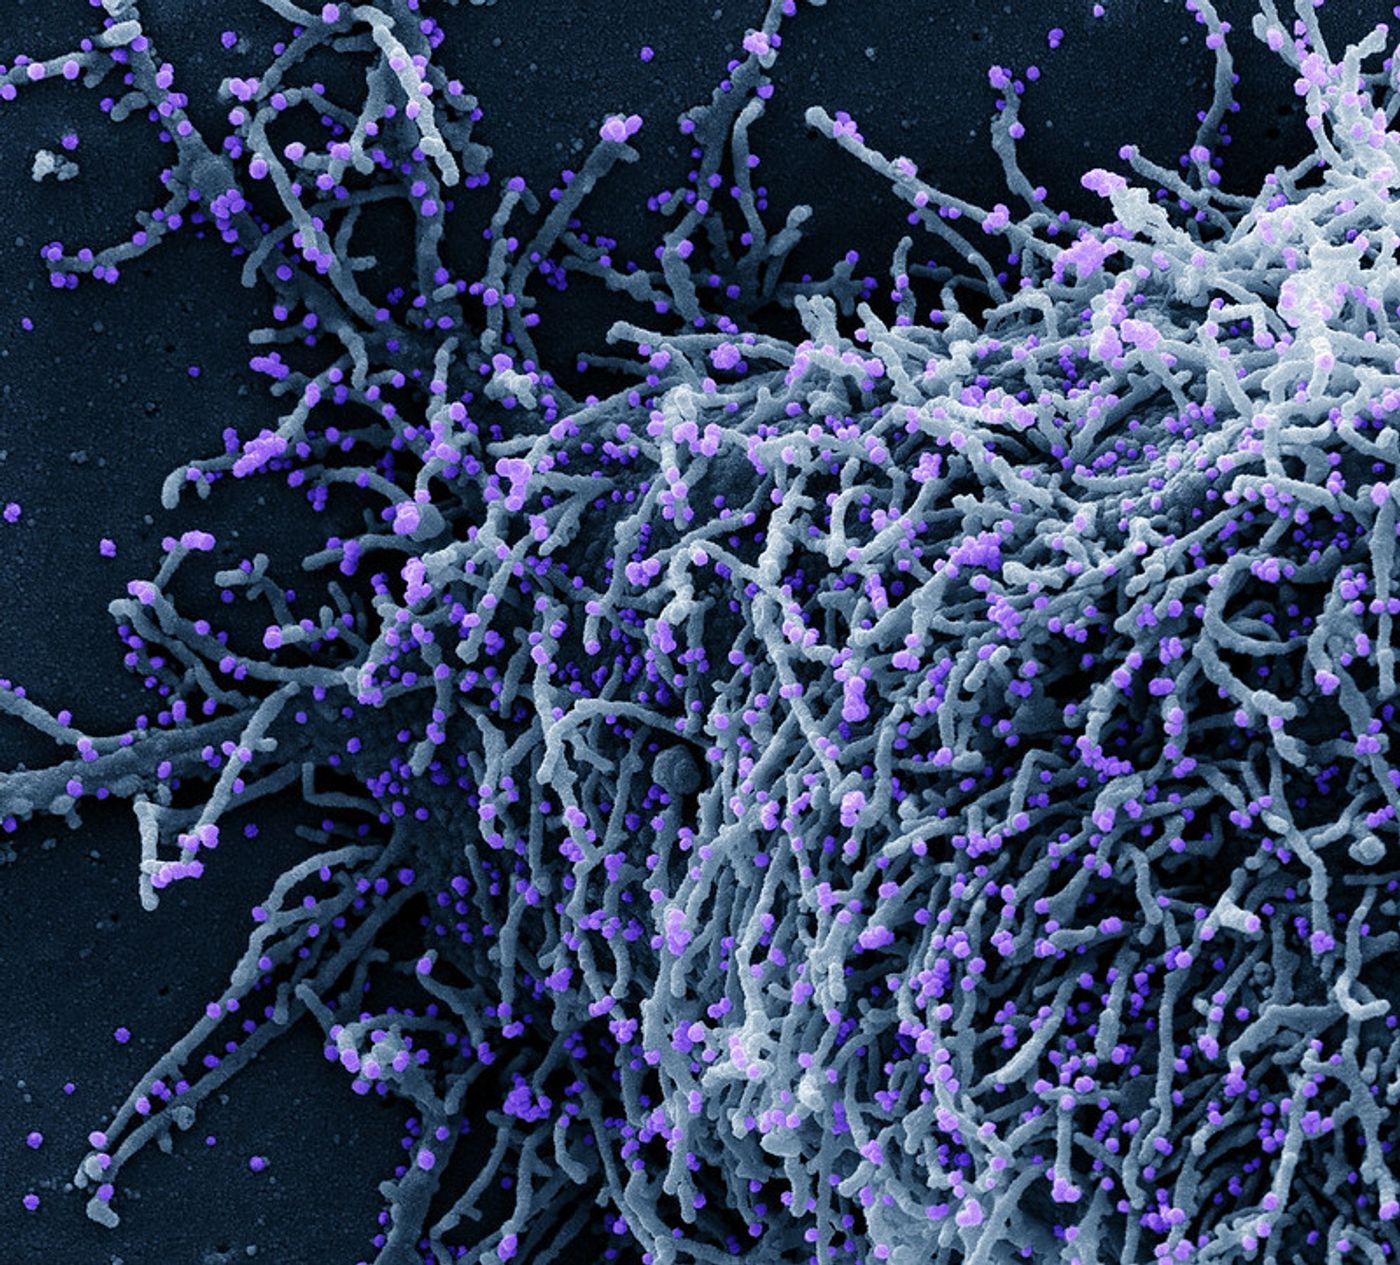 Colorized scanning electron micrograph of a cell (blue) infected with a variant strain of SARS-CoV-2 virus particles (purple), isolated from a patient sample. Image captured at the NIAID Integrated Research Facility (IRF) in Fort Detrick, Maryland. Credit: NIAID